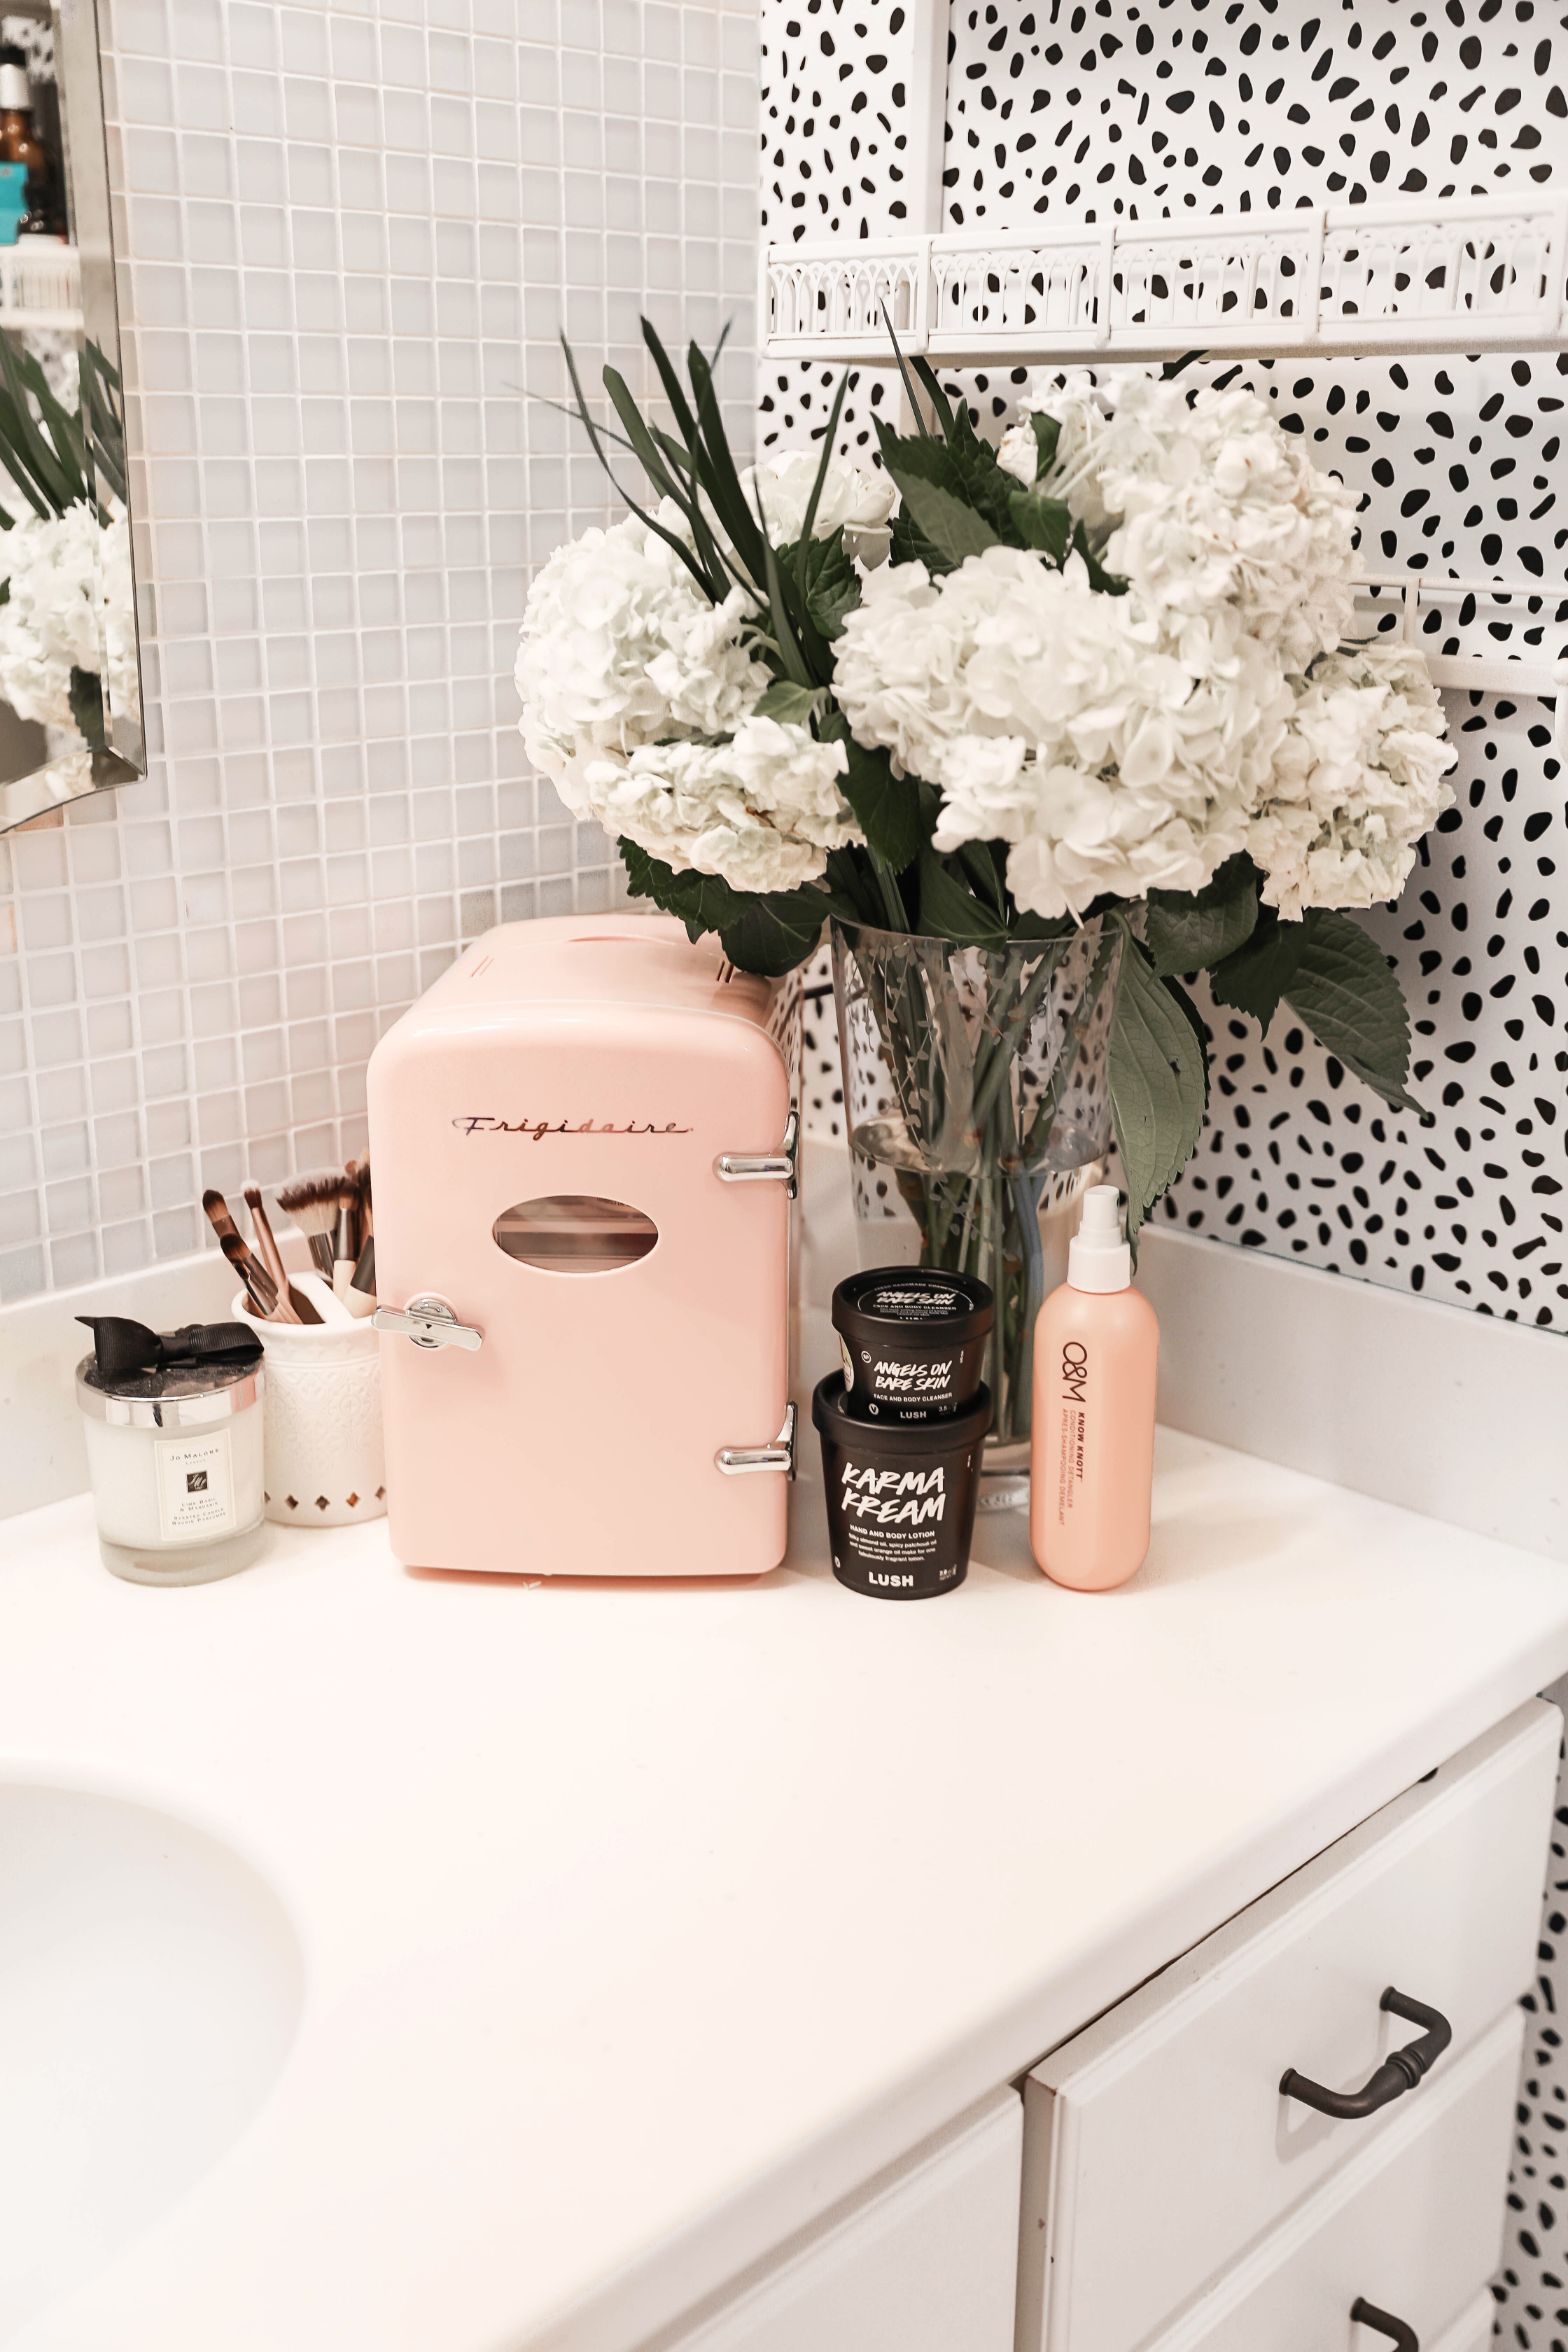 Beauty favorites spring 2019! I love my frigidaire mini retro beauty fridge! I stocked it with amazing face mask and lush products! Details on beauty and fashion blog daily dose of charm by lauren lindmark